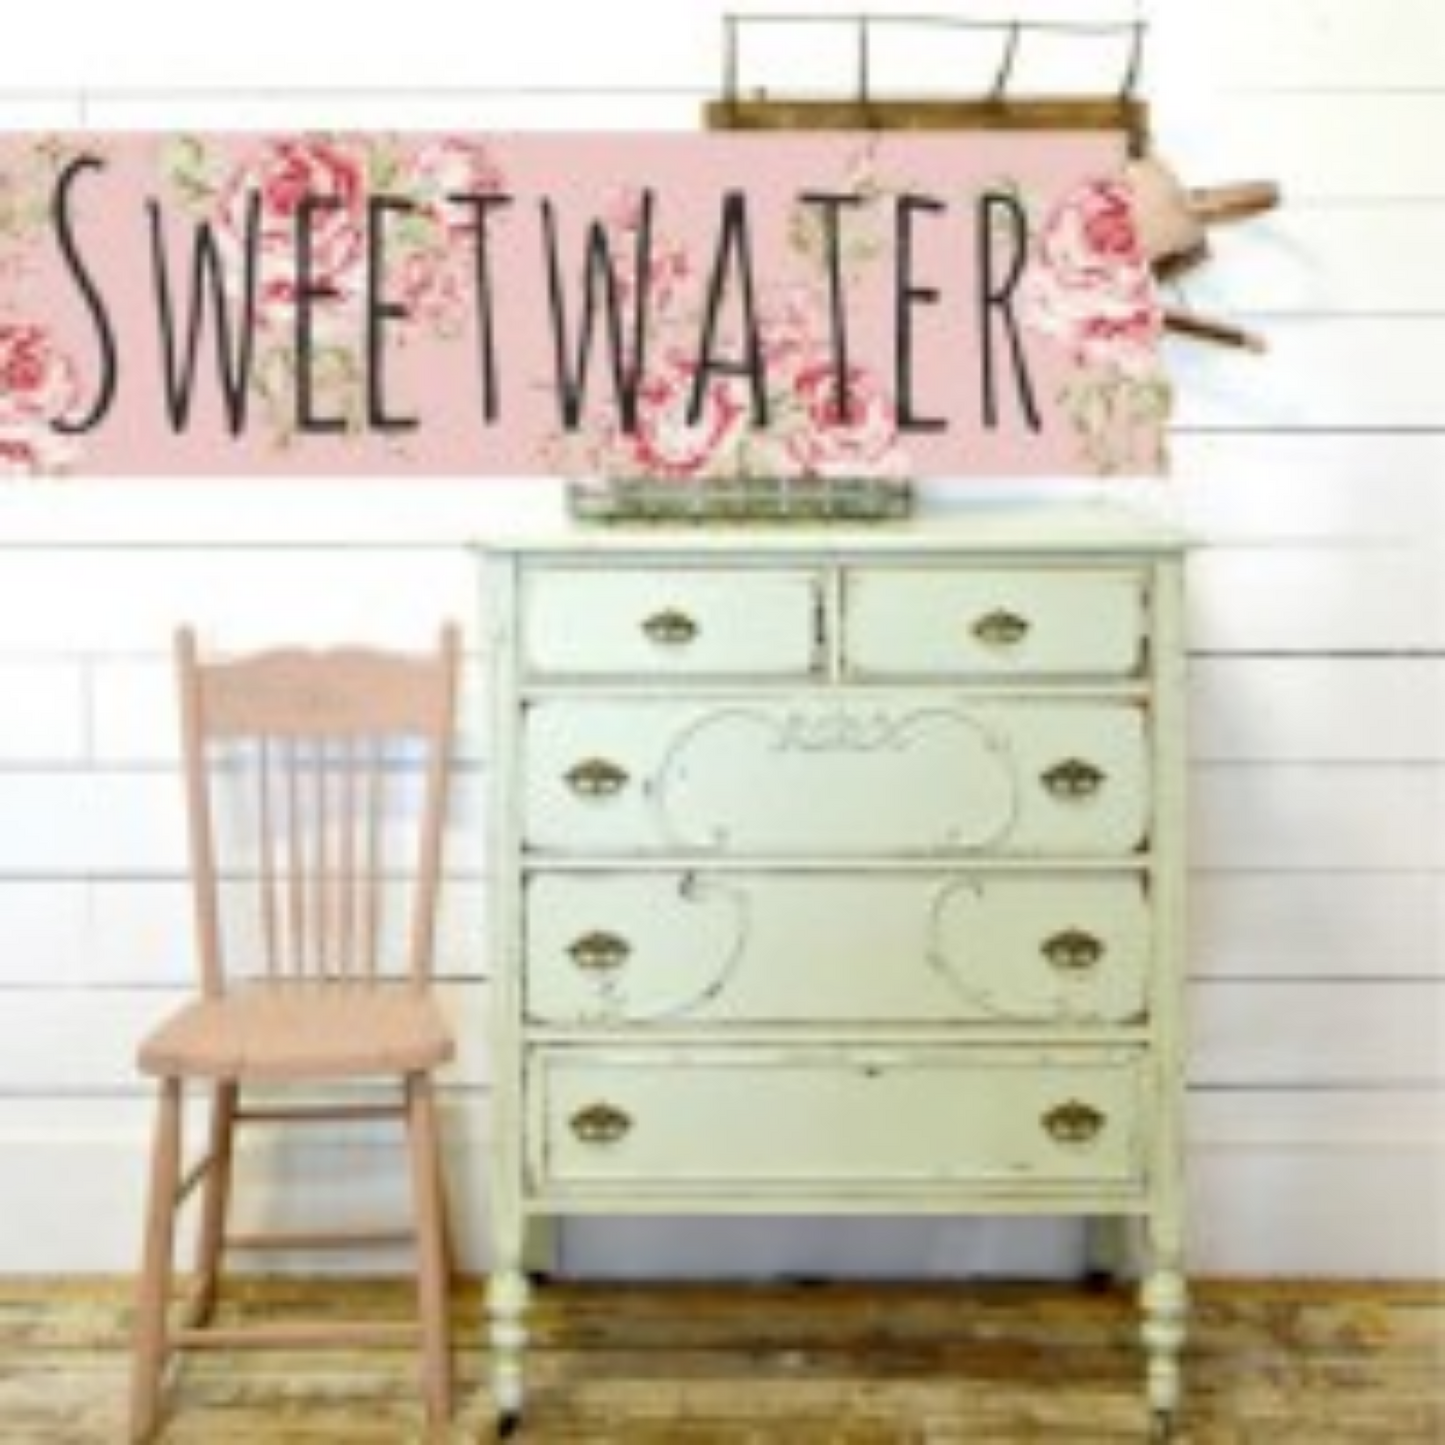 Antique dresser painted in Sweetwater (light blue) by Sweet Pickins Milk Paint available at Milton's Daughter